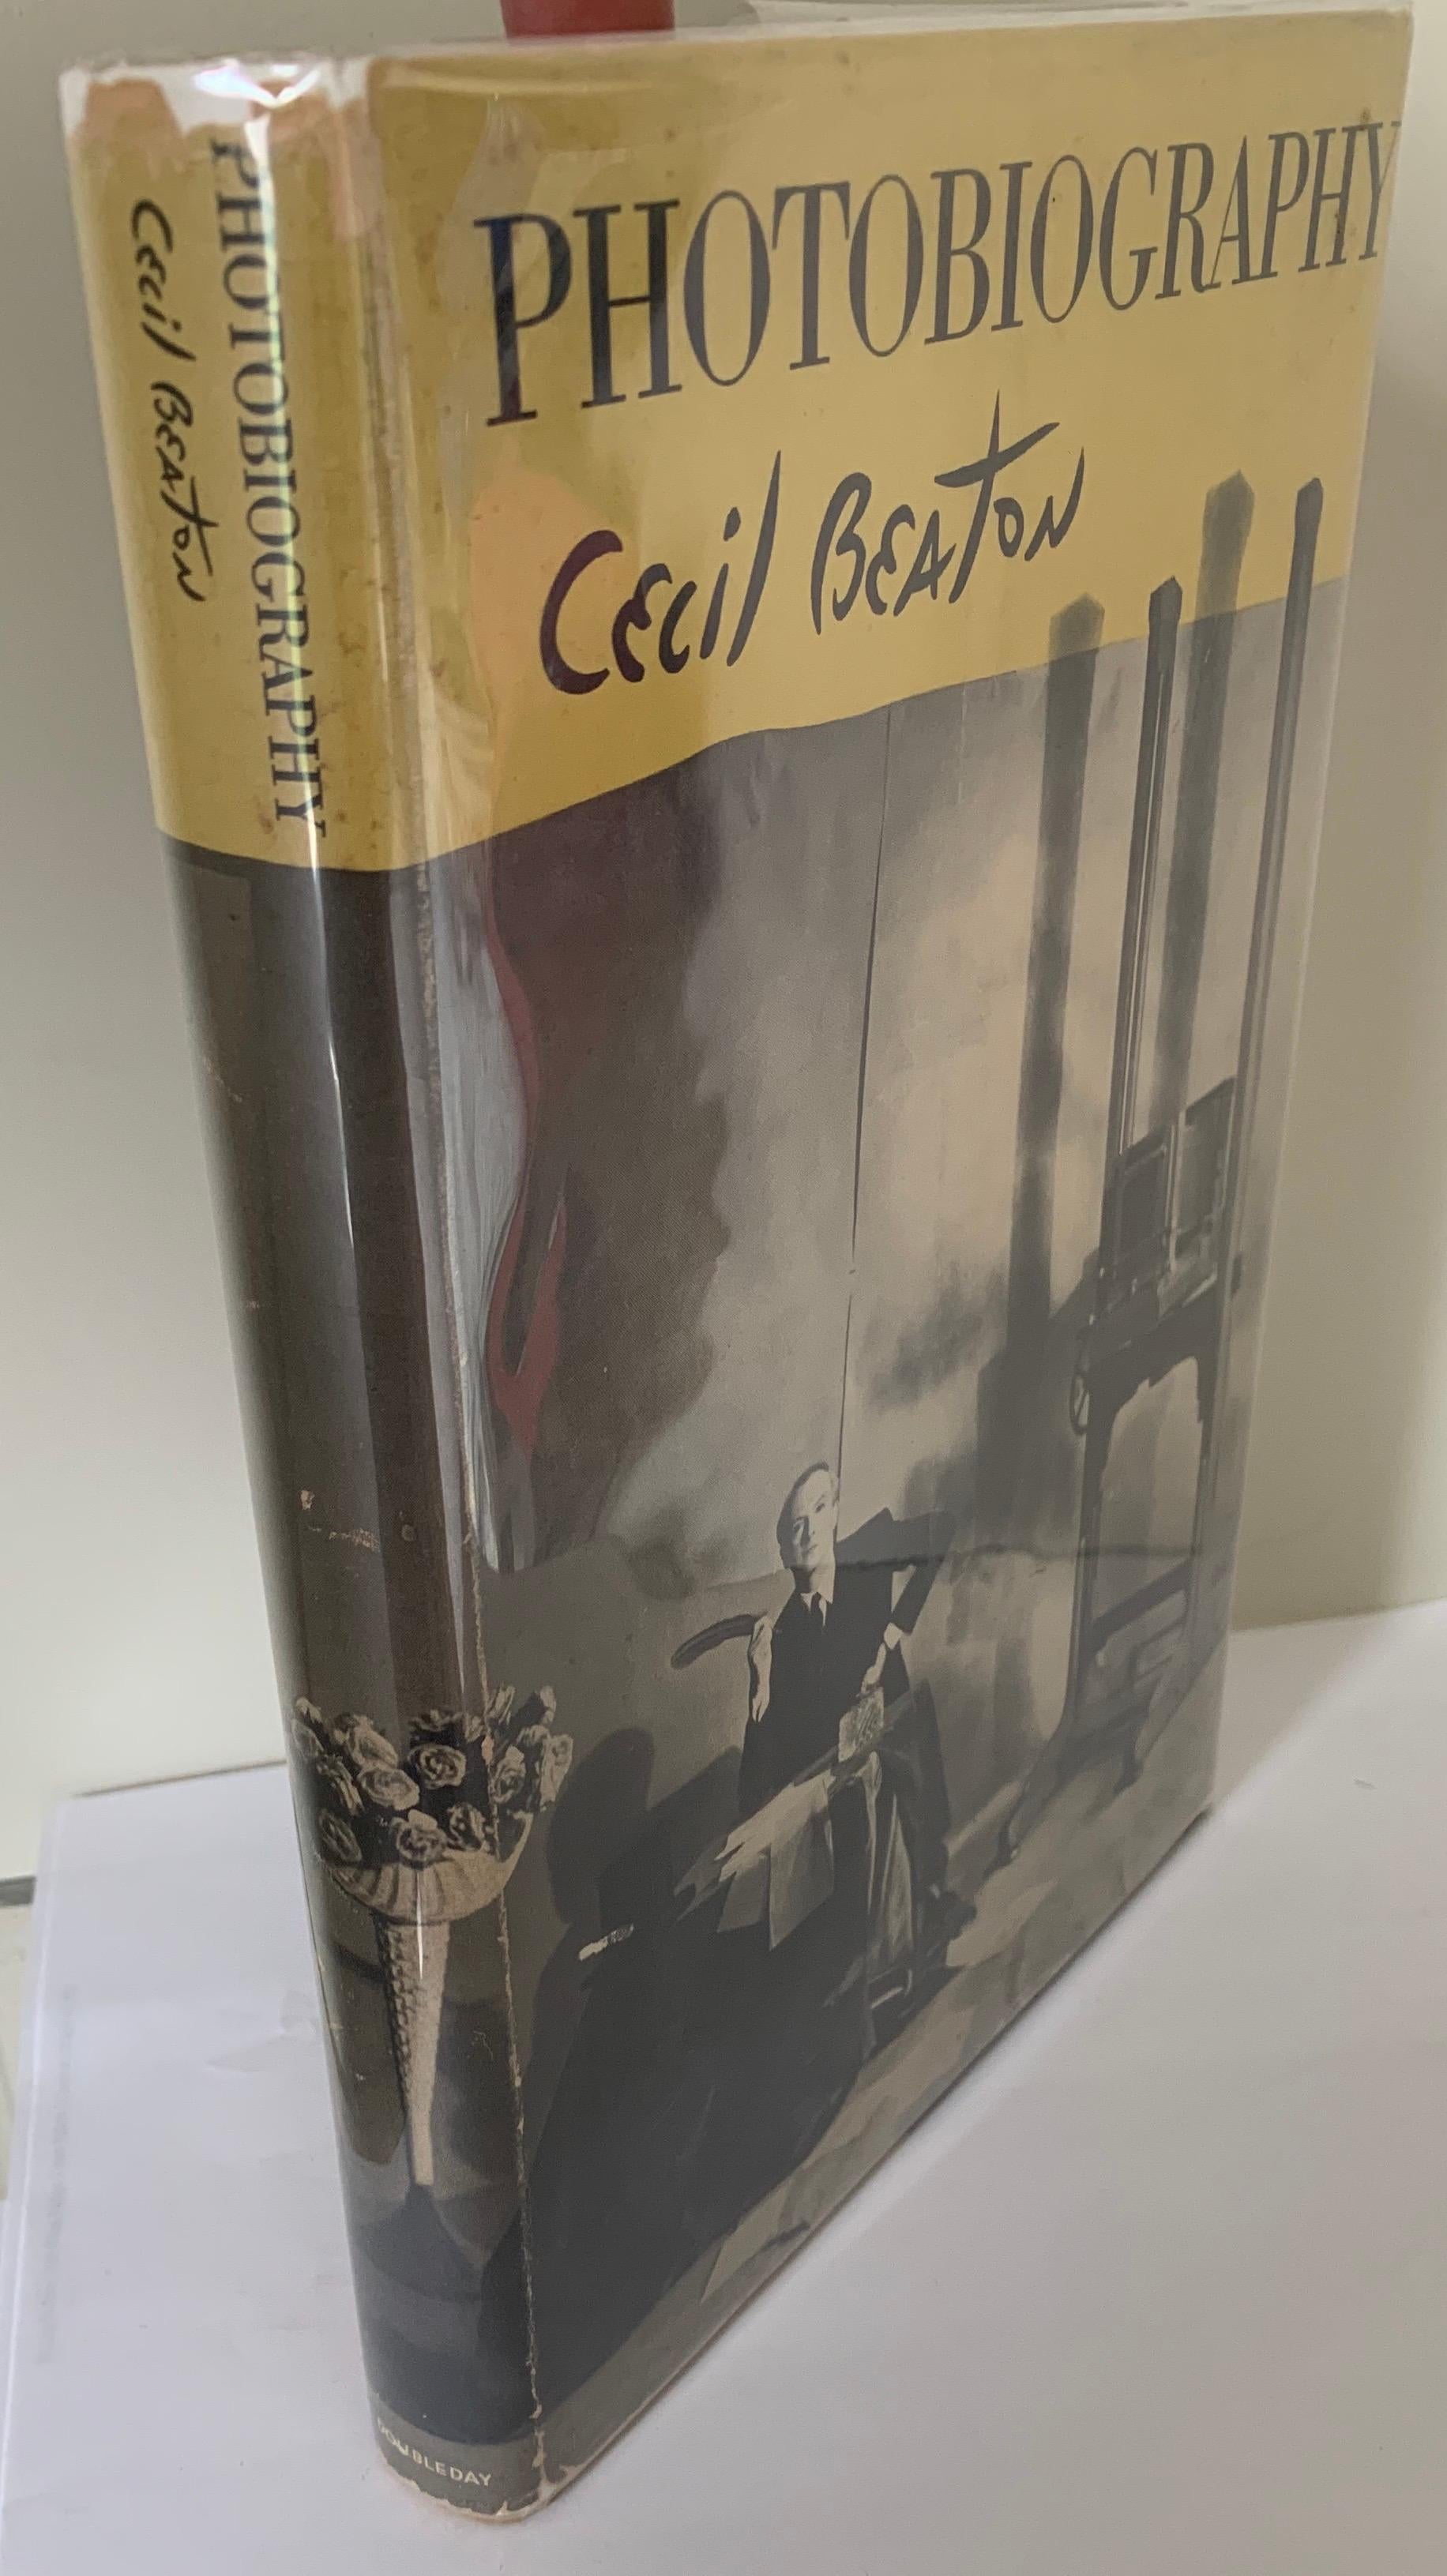 Hollywood Regency Cecil Beaton Photography First Edition Book